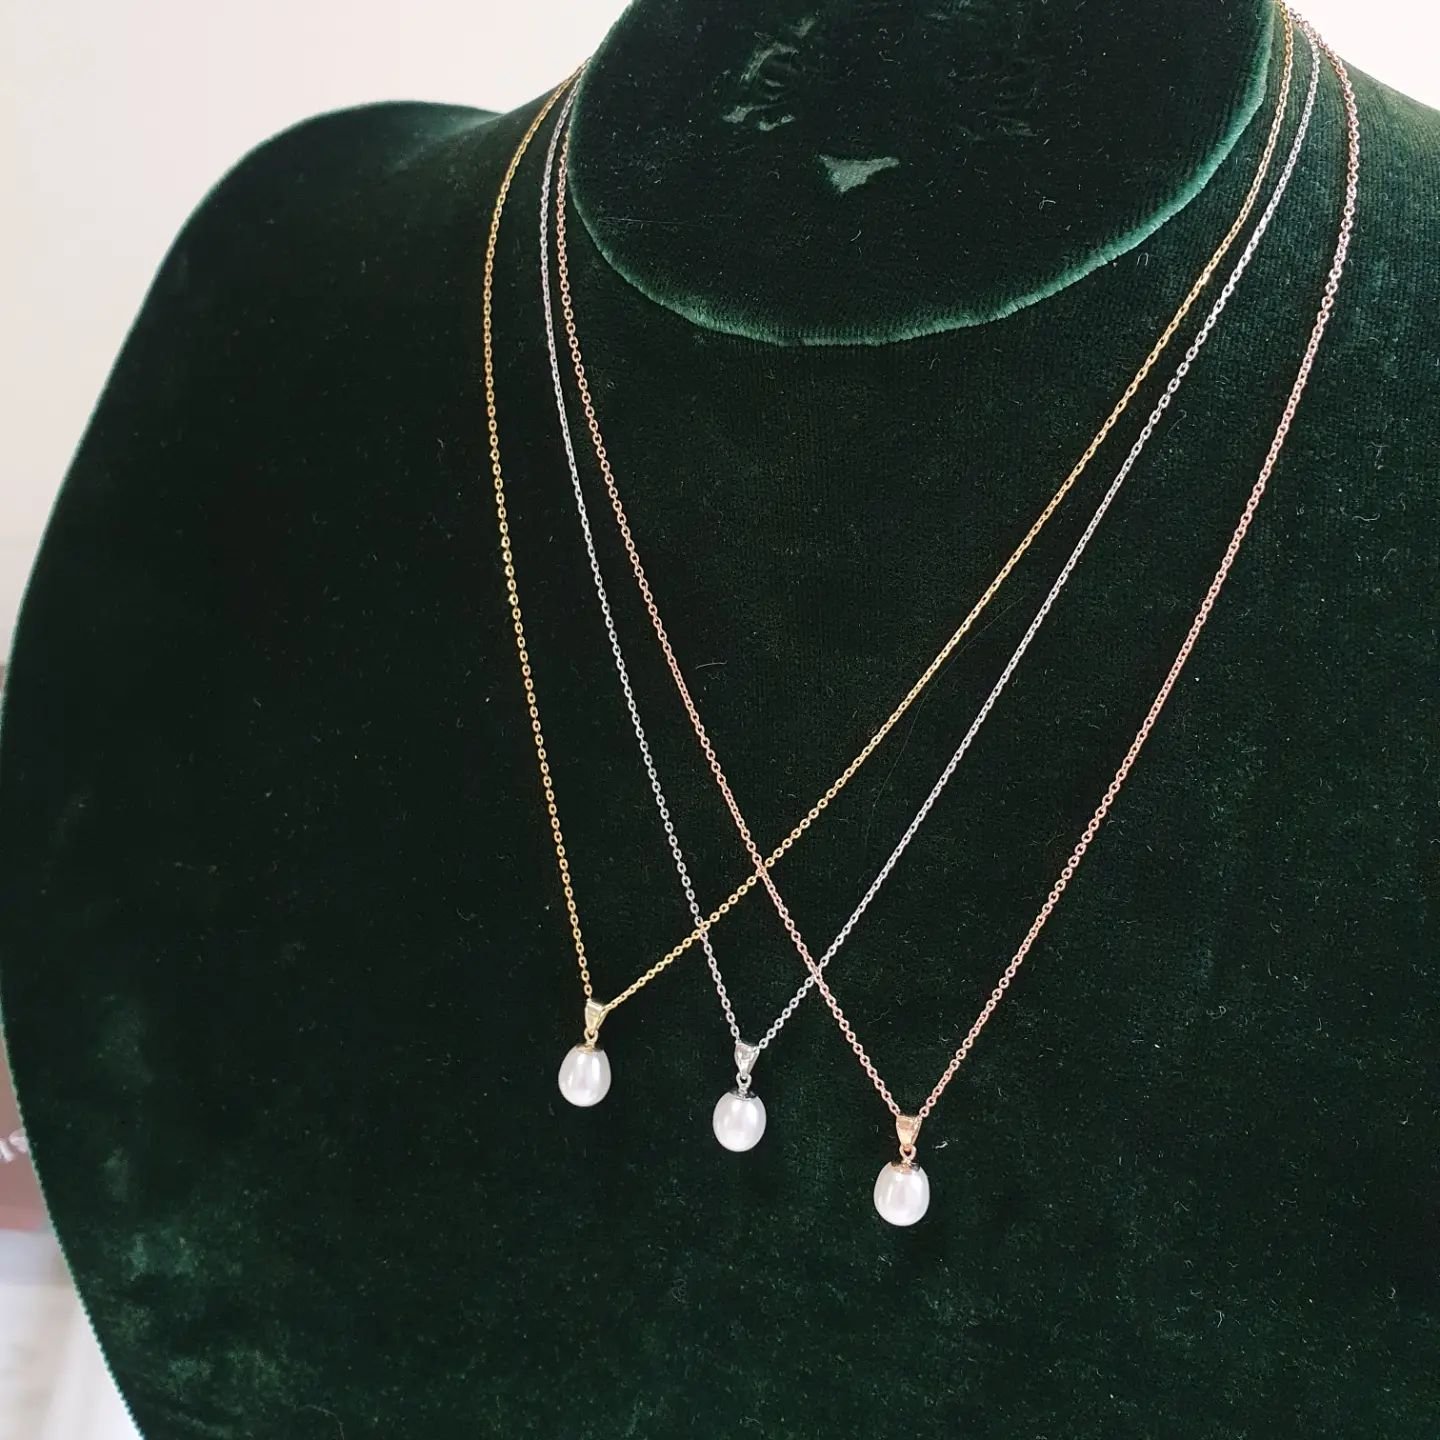 MOTHERS DAY 💐

Pieces available now

Petite Pearl Drop Necklace in solid yellow, white and rose gold (only one of each available) 

Solid gold.  Not plated. Freshwater Pearl drop 

$390 each x 

So delicate and feminine and pretty 🤍